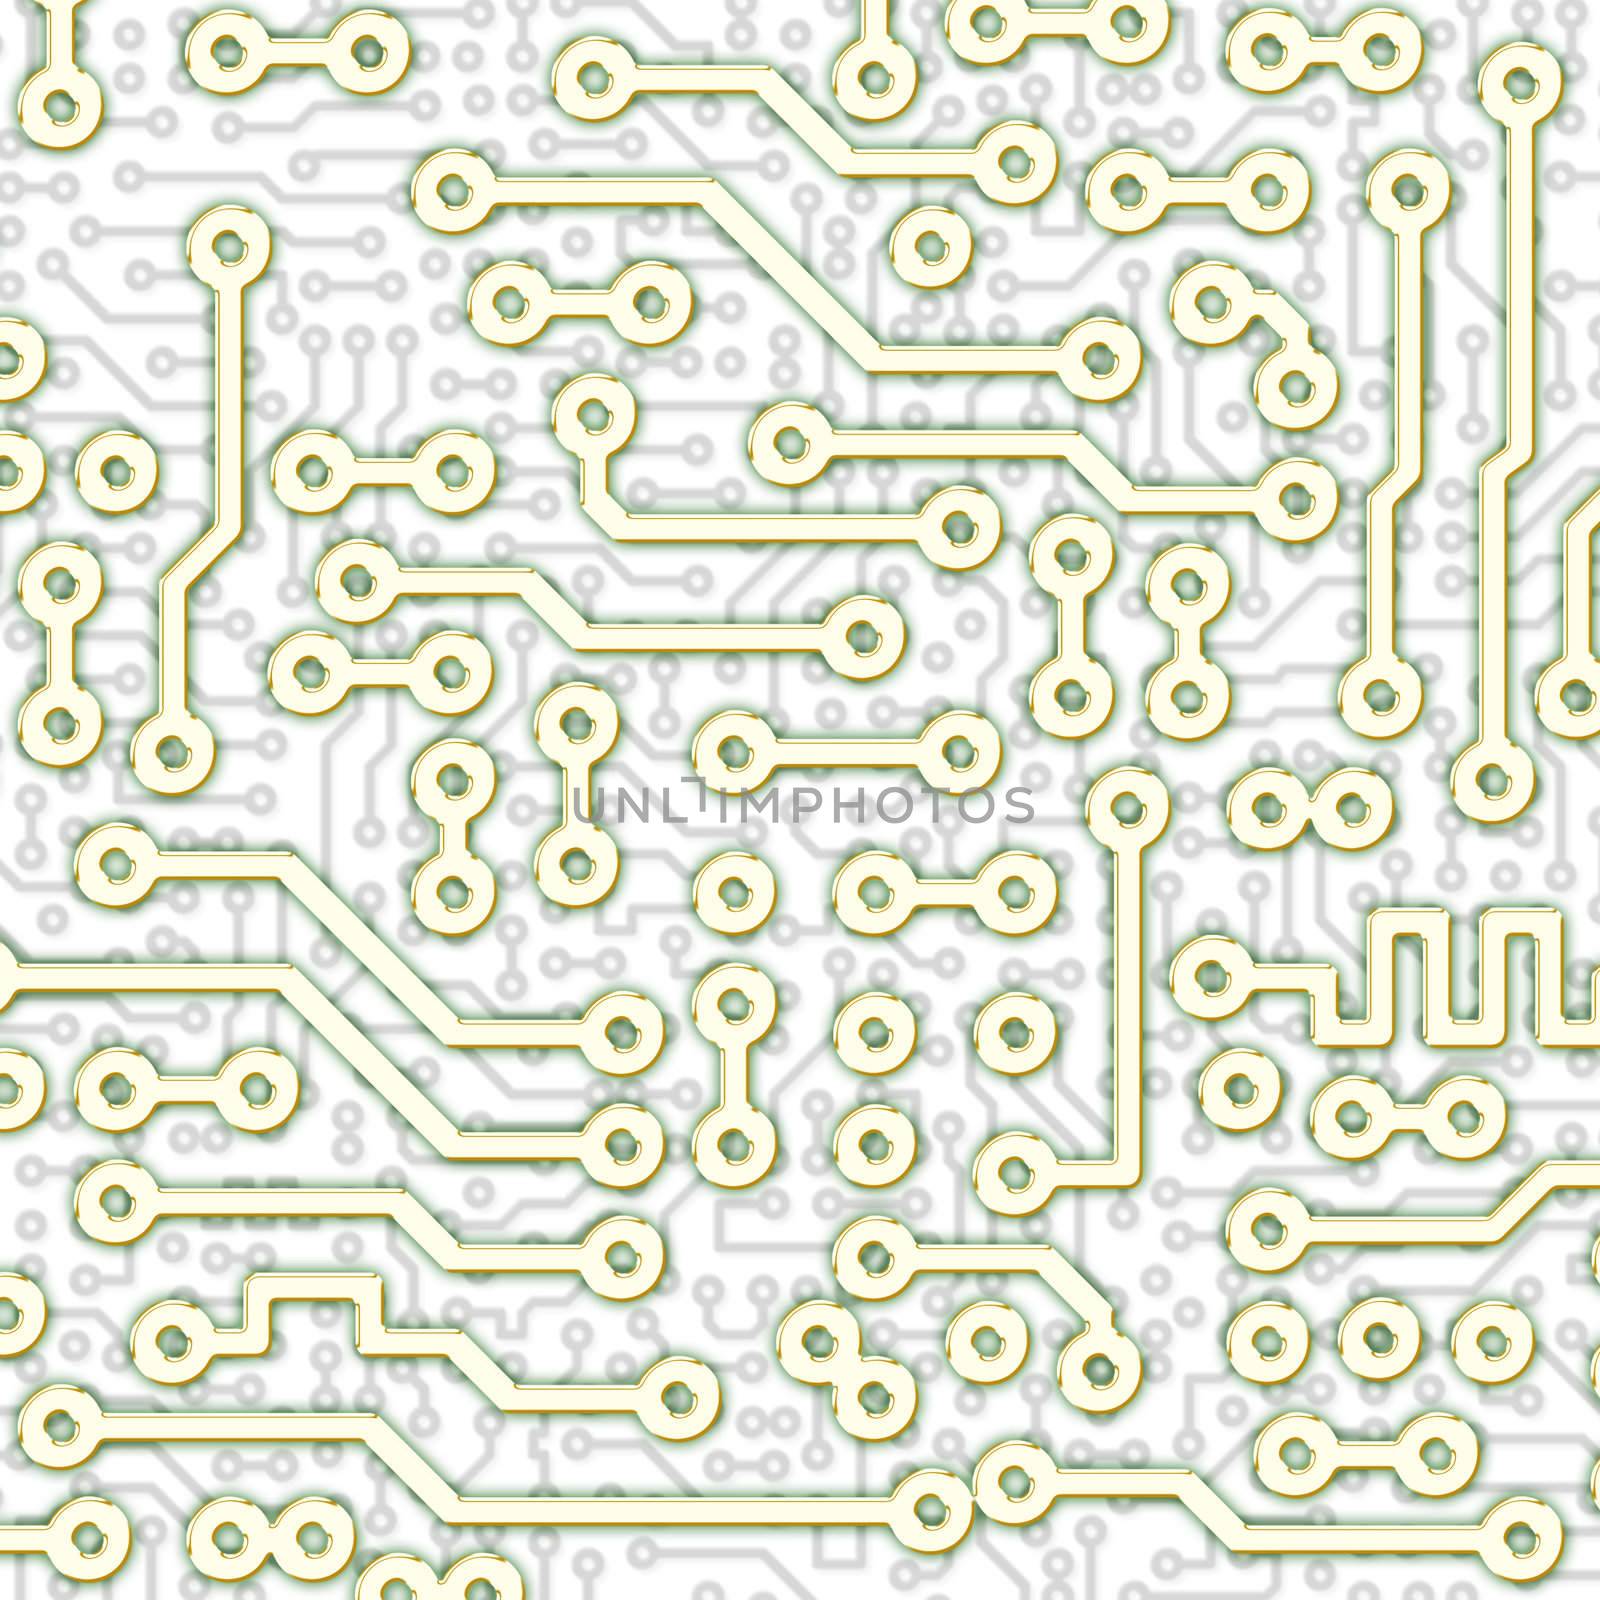 Abstract square graphical circuit board light pattern